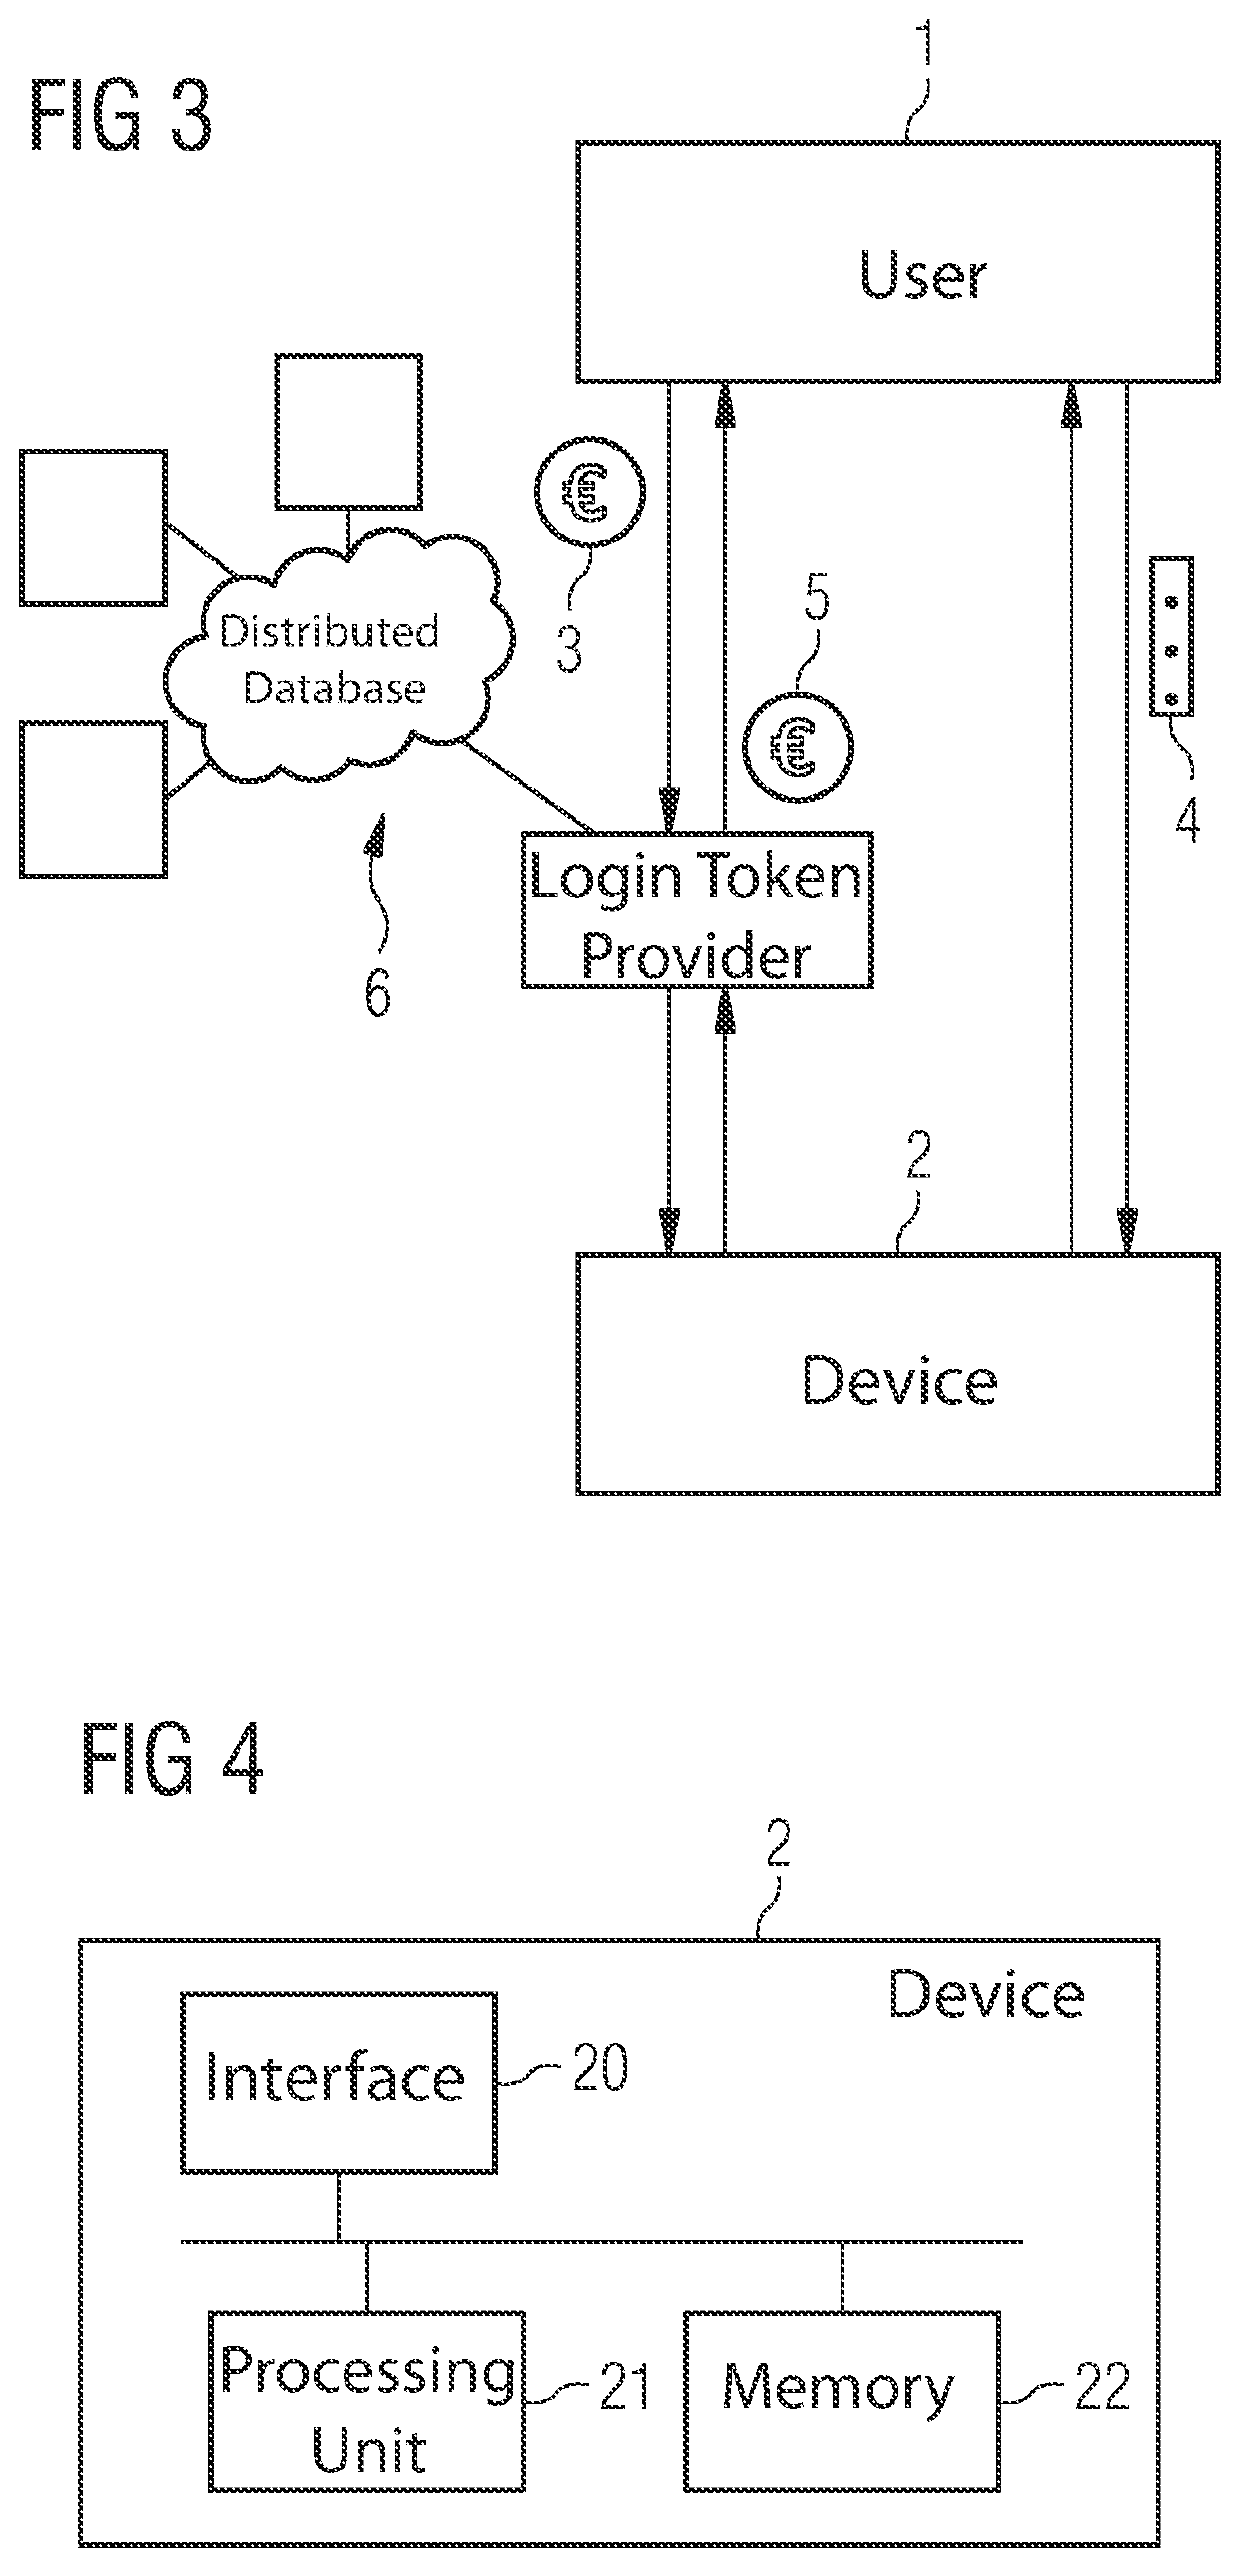 Protection of login processes